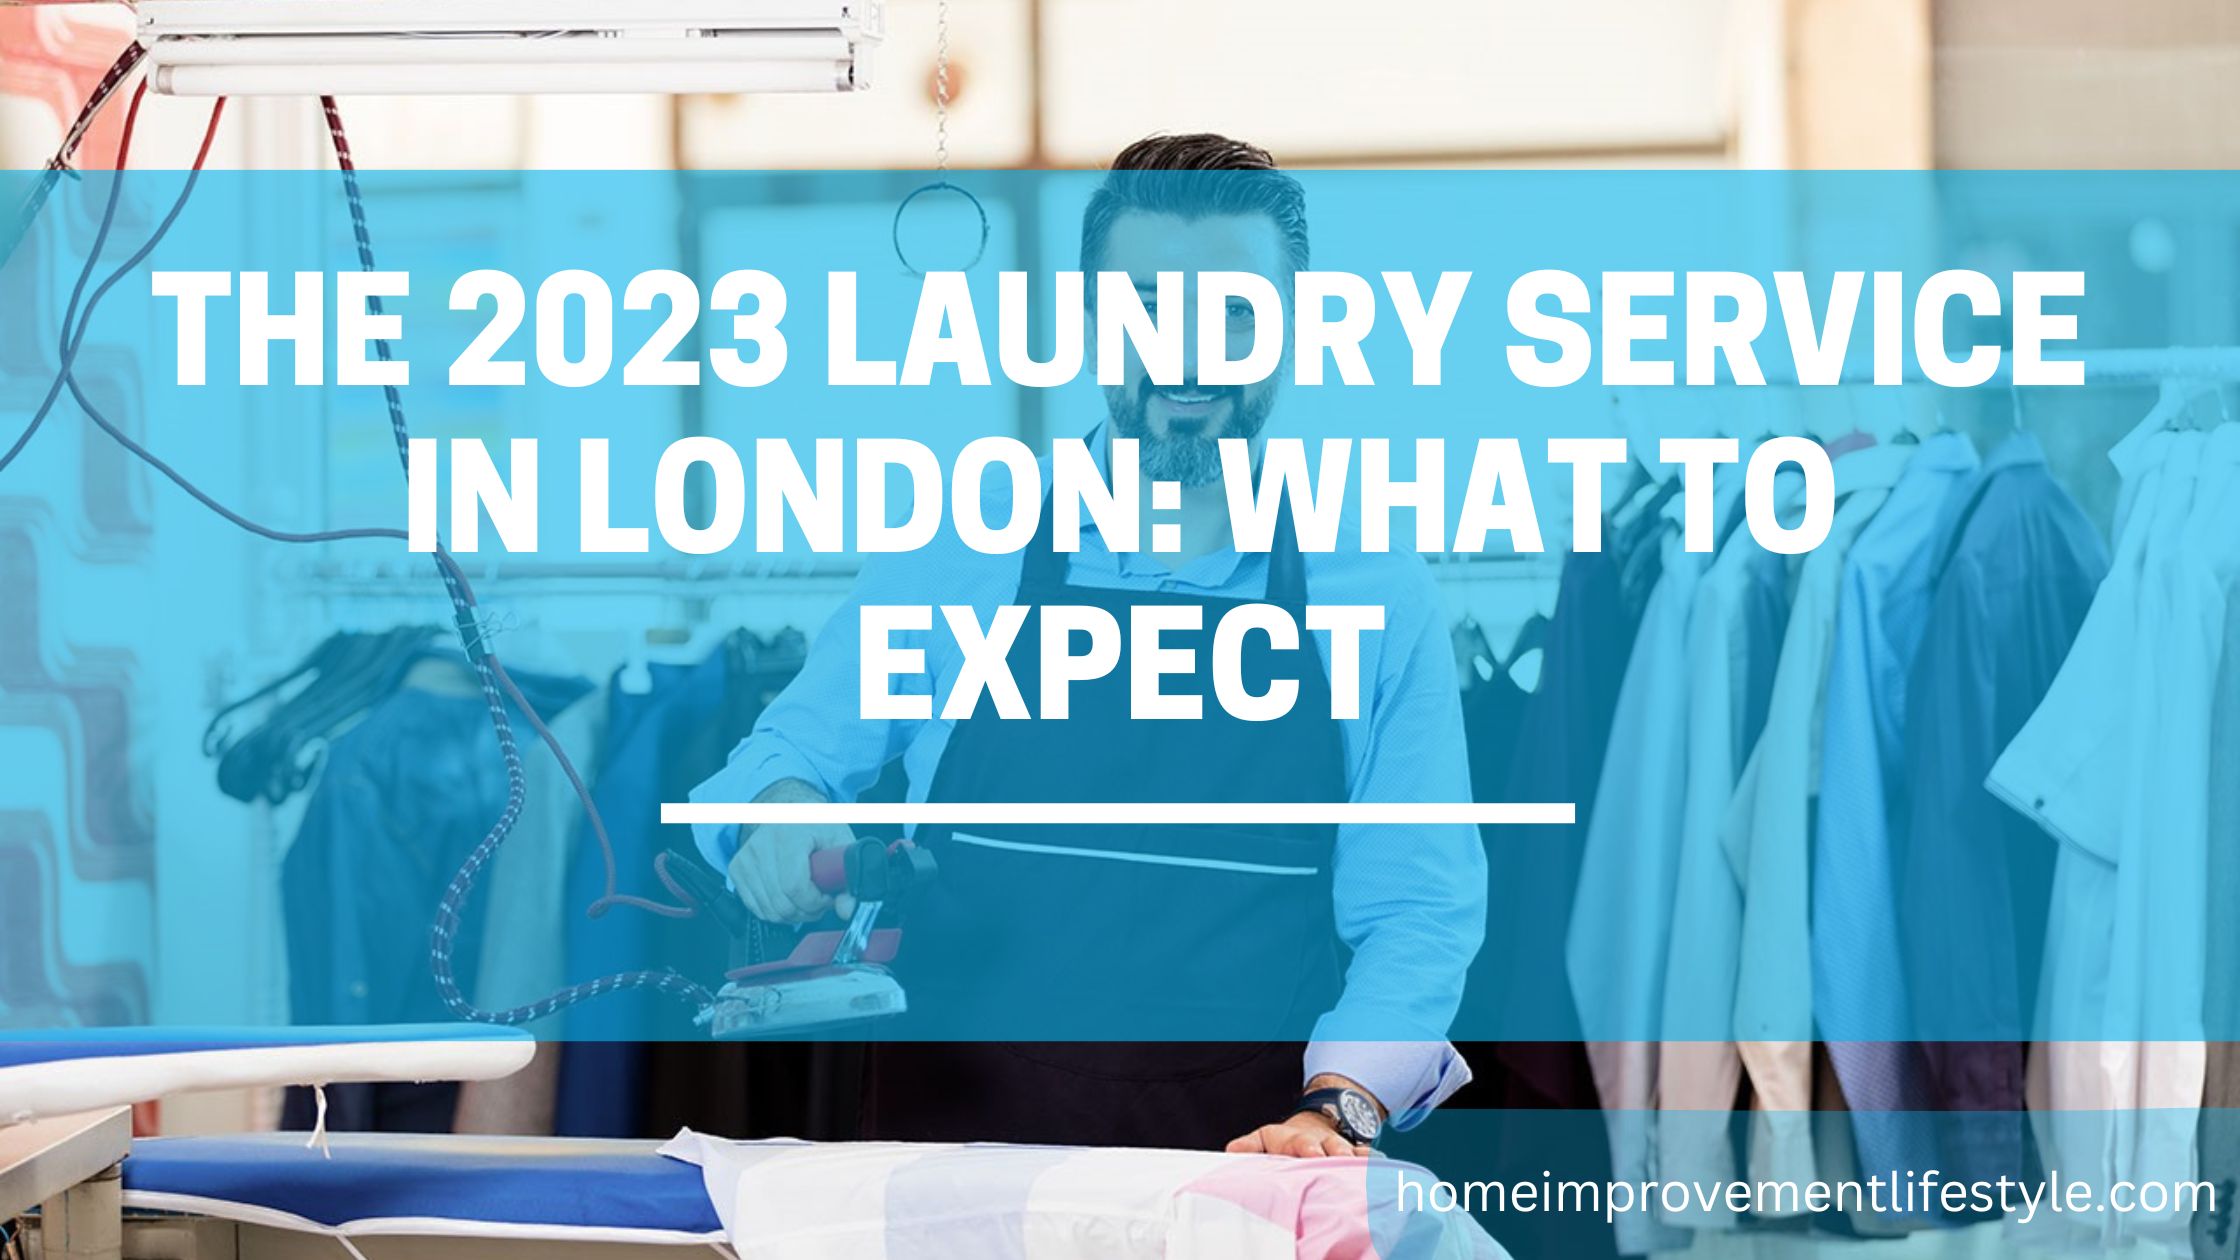 The 2023 Laundry service in London: What to Expect